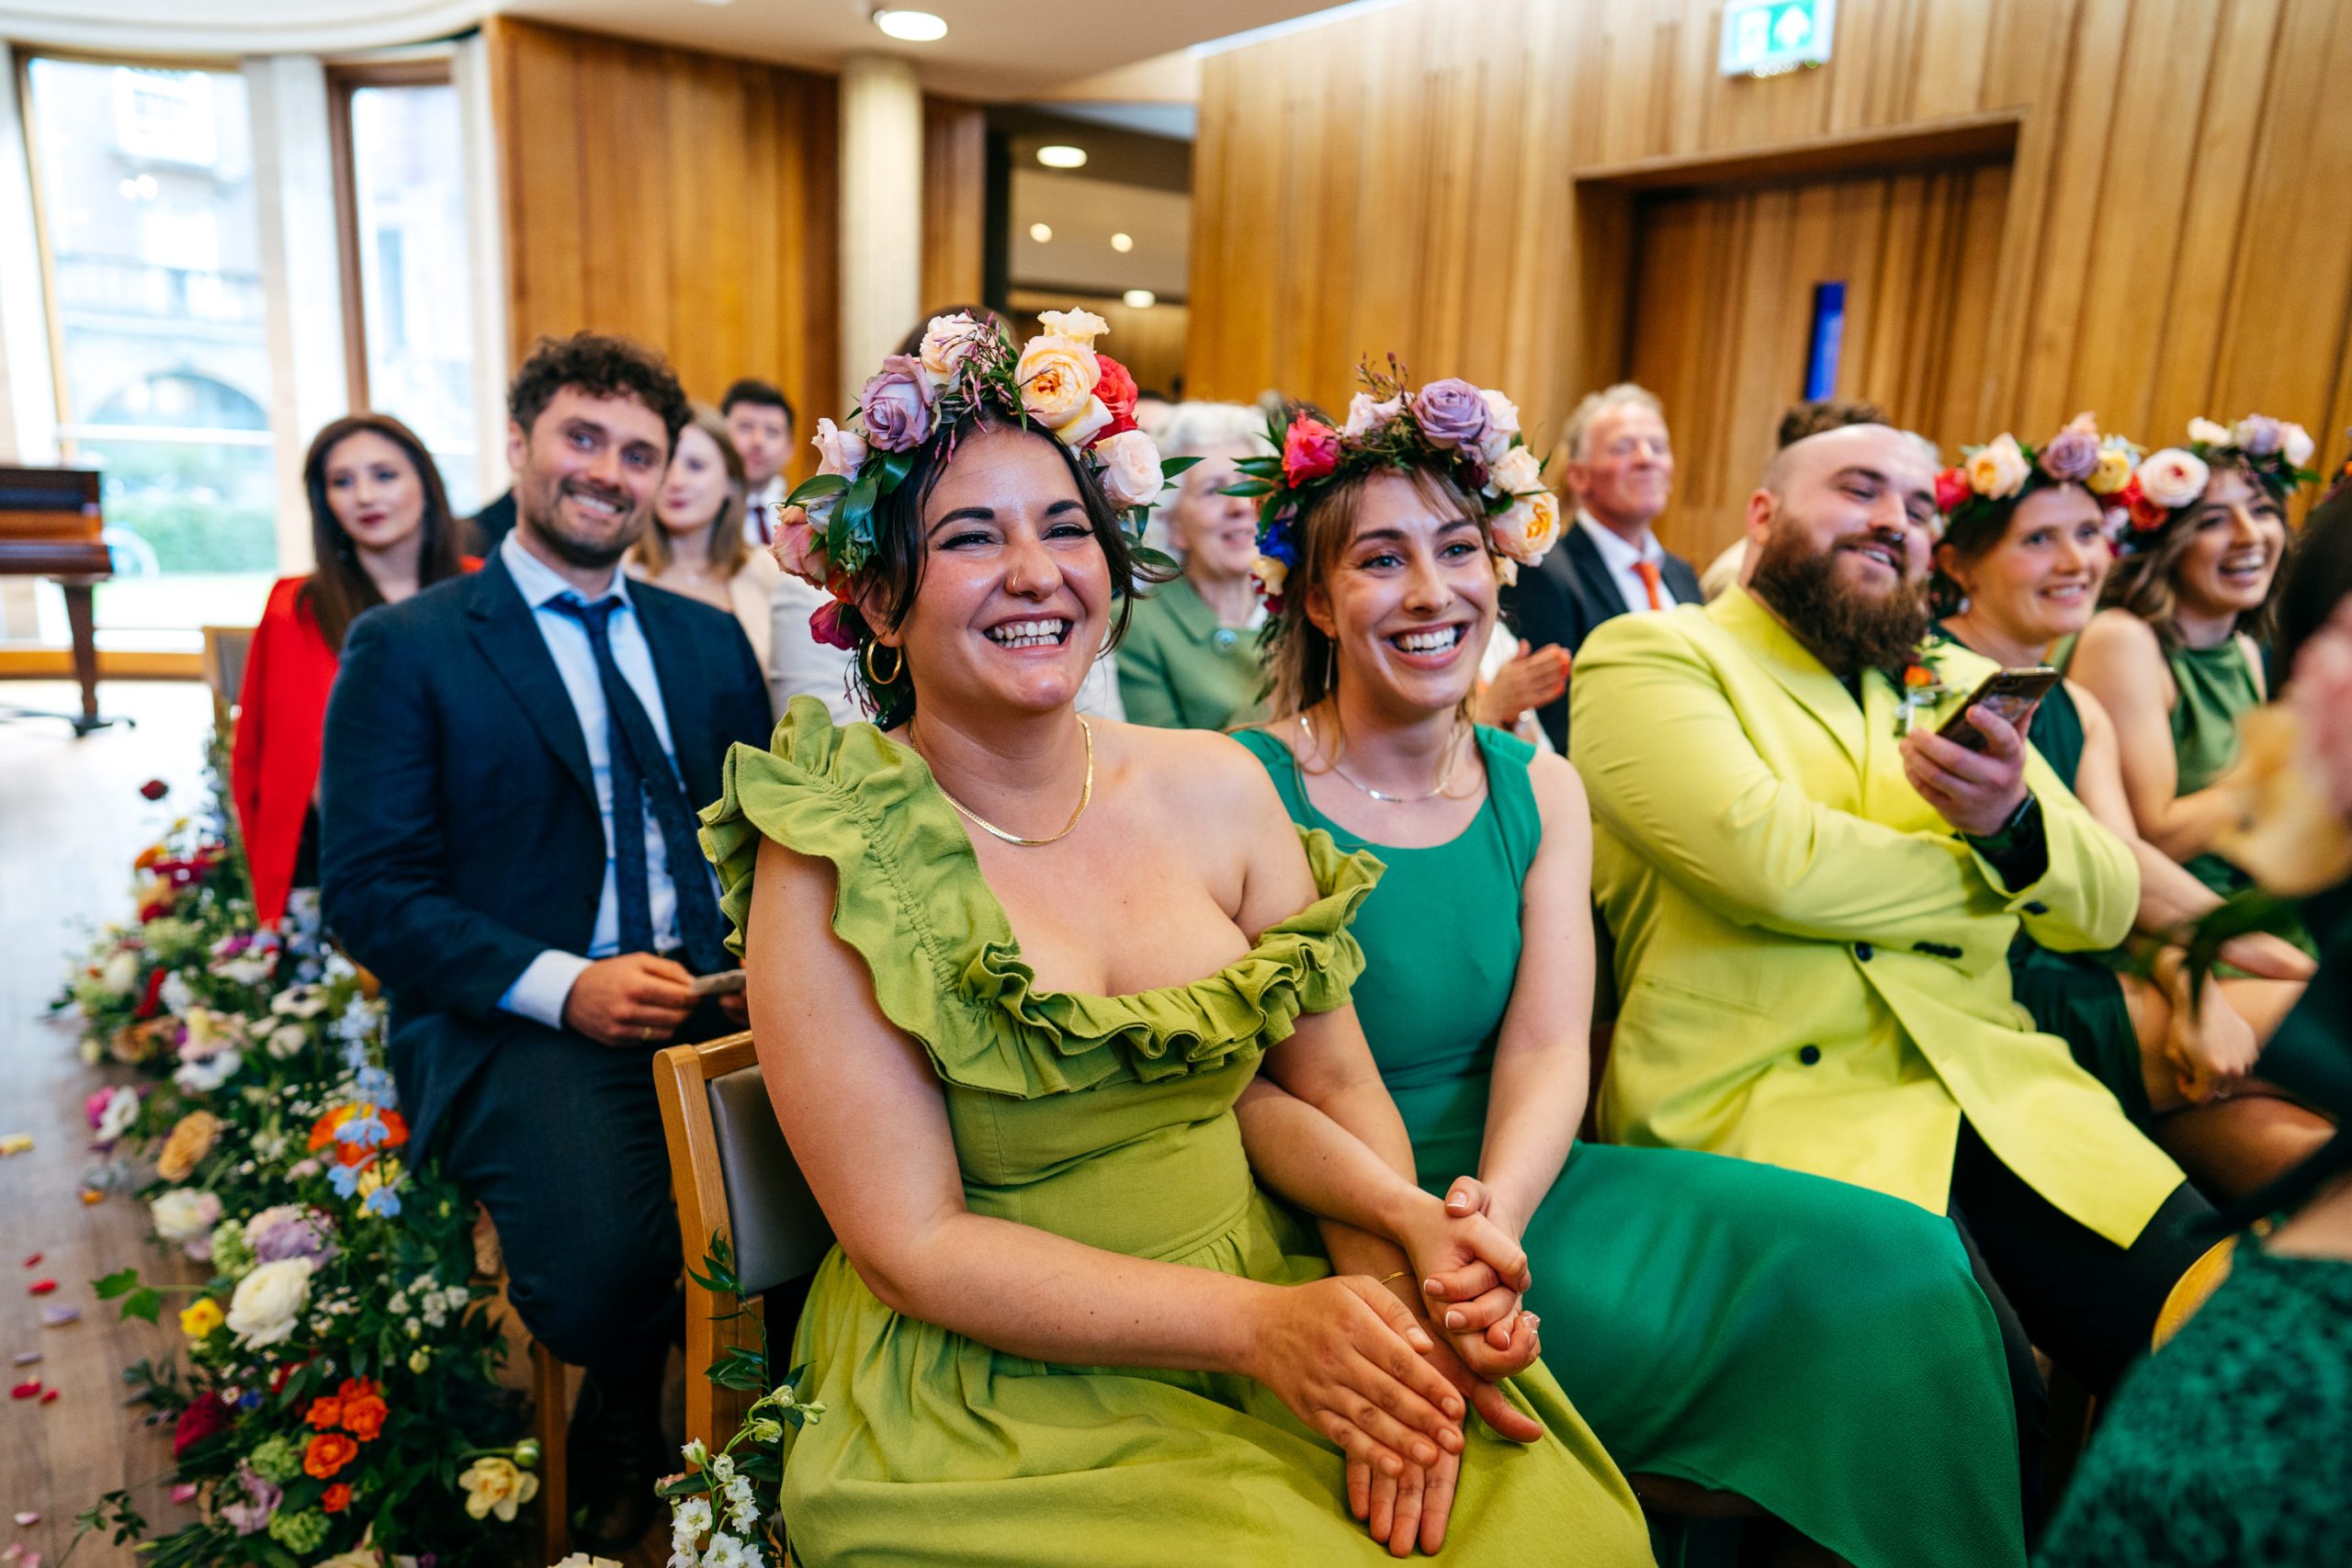 Guests looking super happy during ceremony at Sidney Sussex College Wedding in Cambridge.